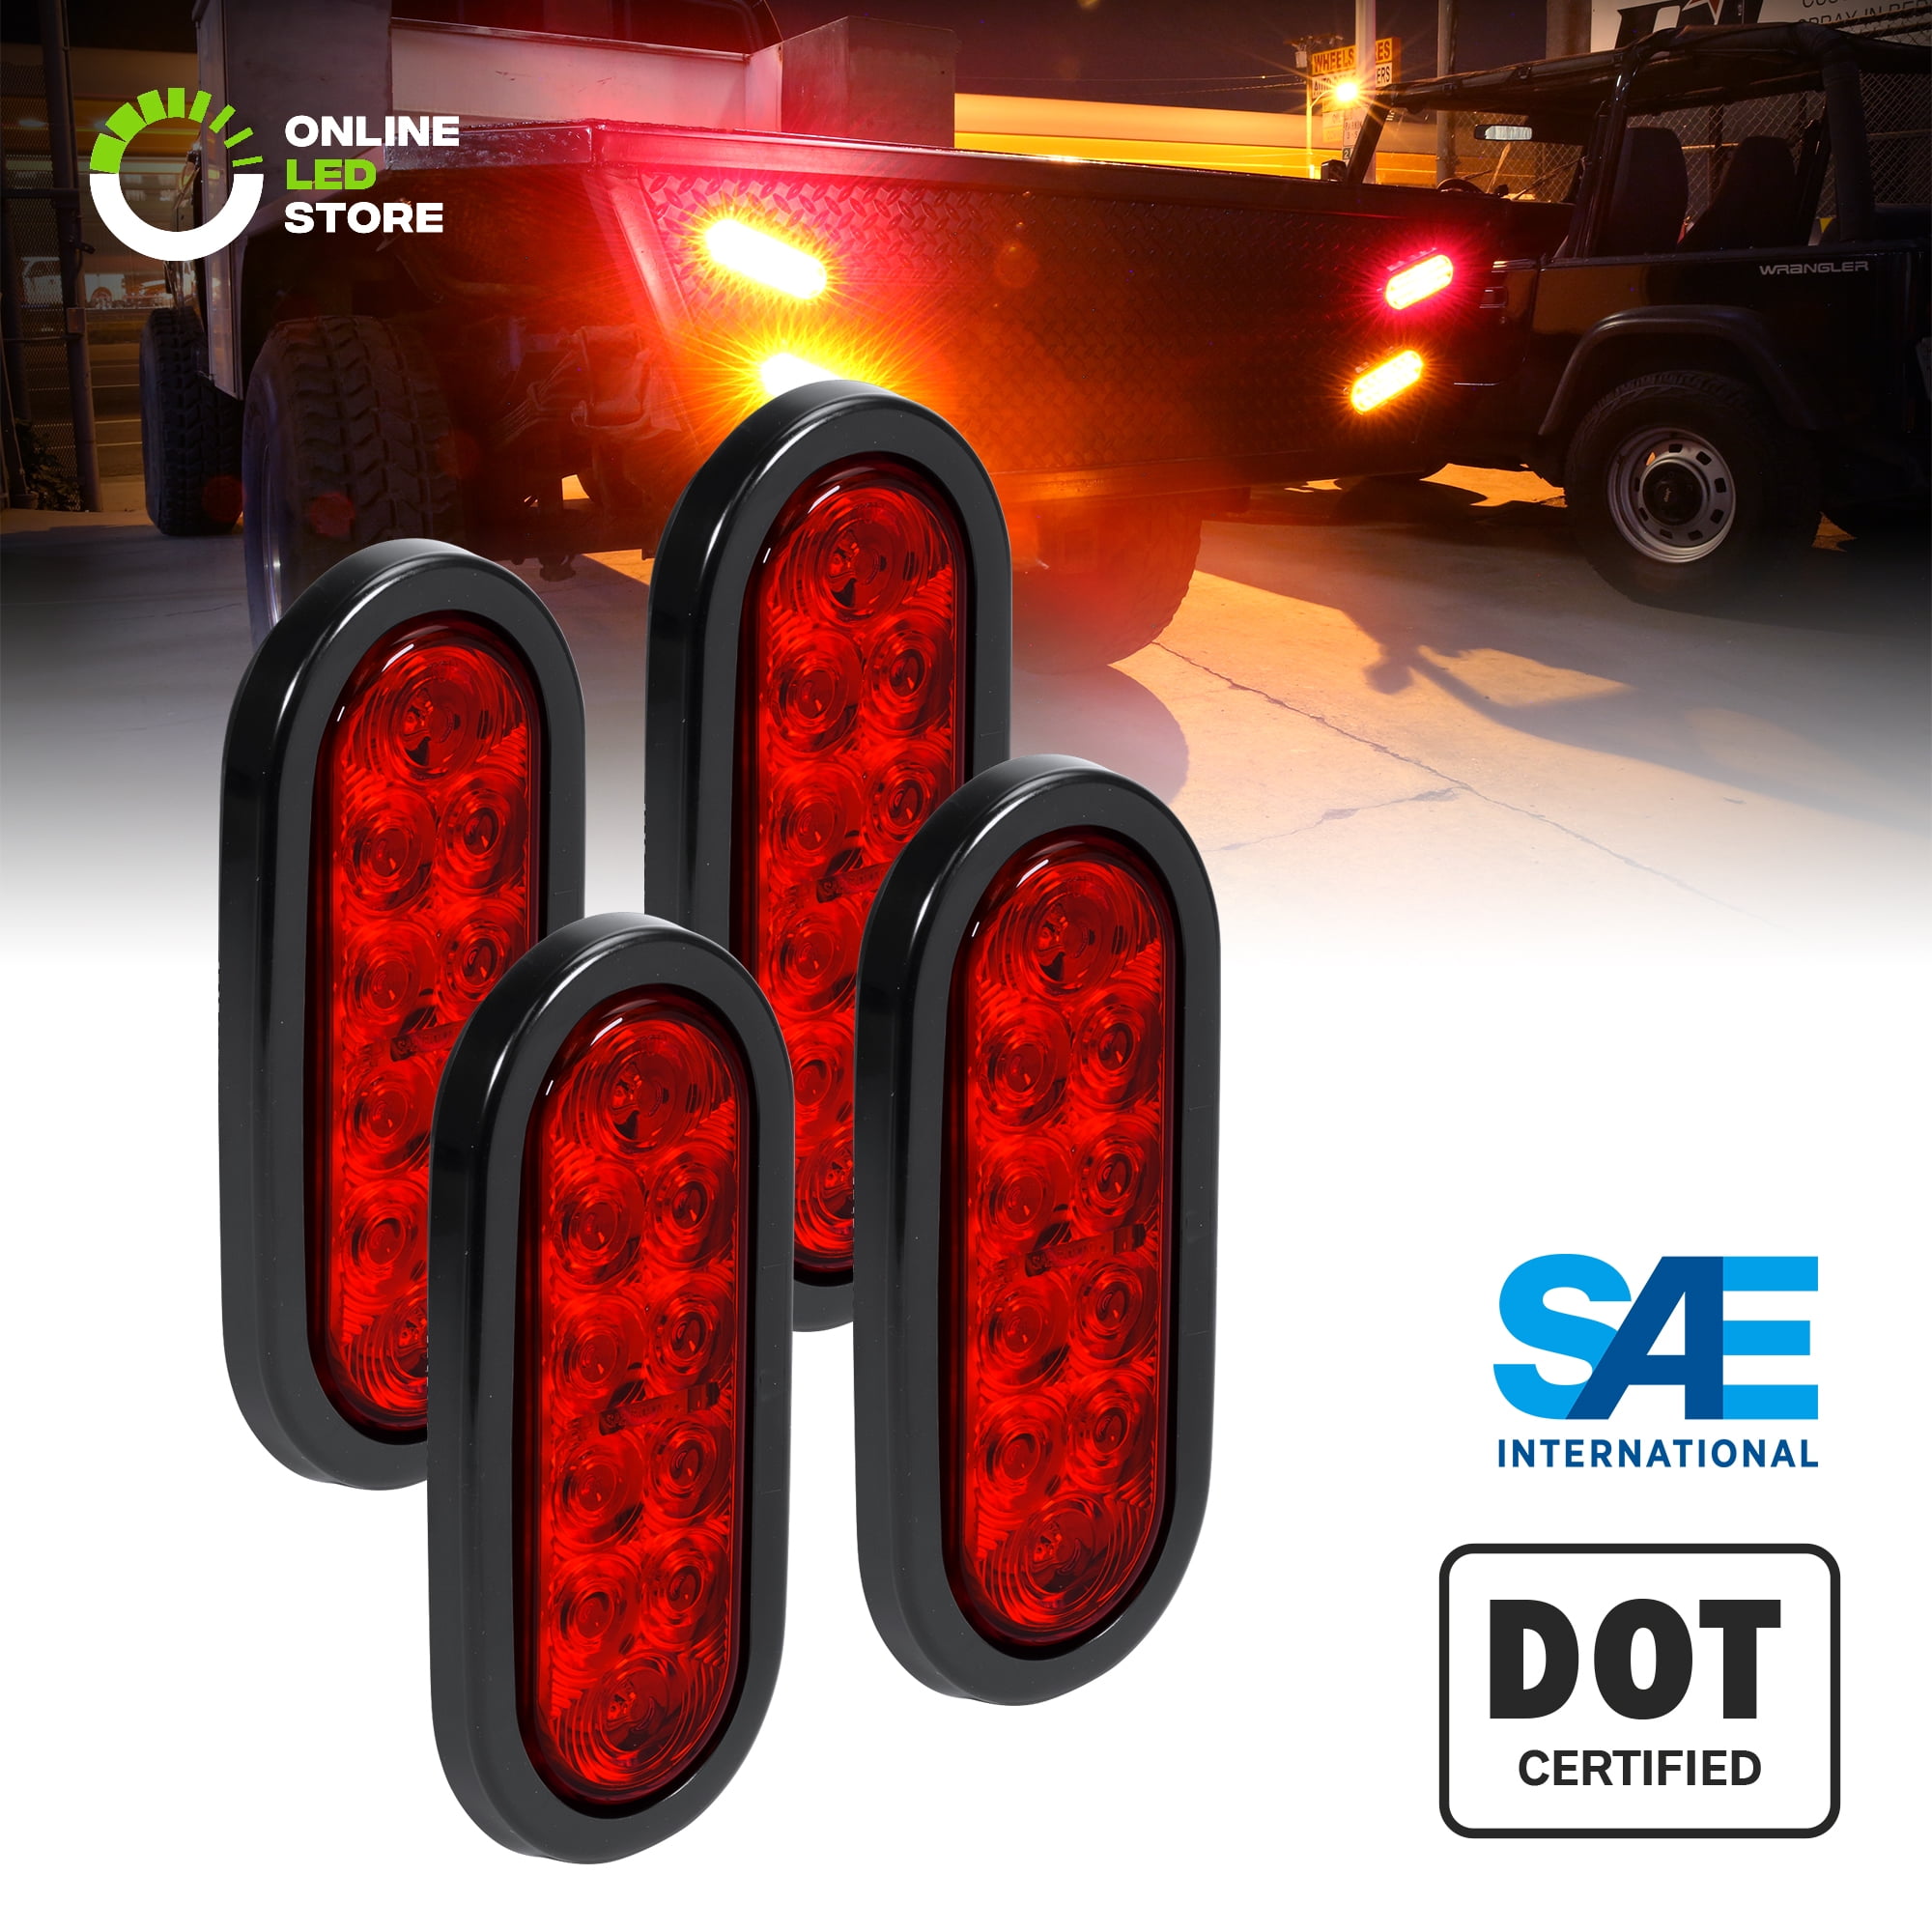 Red Trailer Truck LED Sealed RED 6 Oval Stop/Turn/Tail Light Marine Waterproof Including 3-pin Water Tight Plug with Wires and Grommet 2 